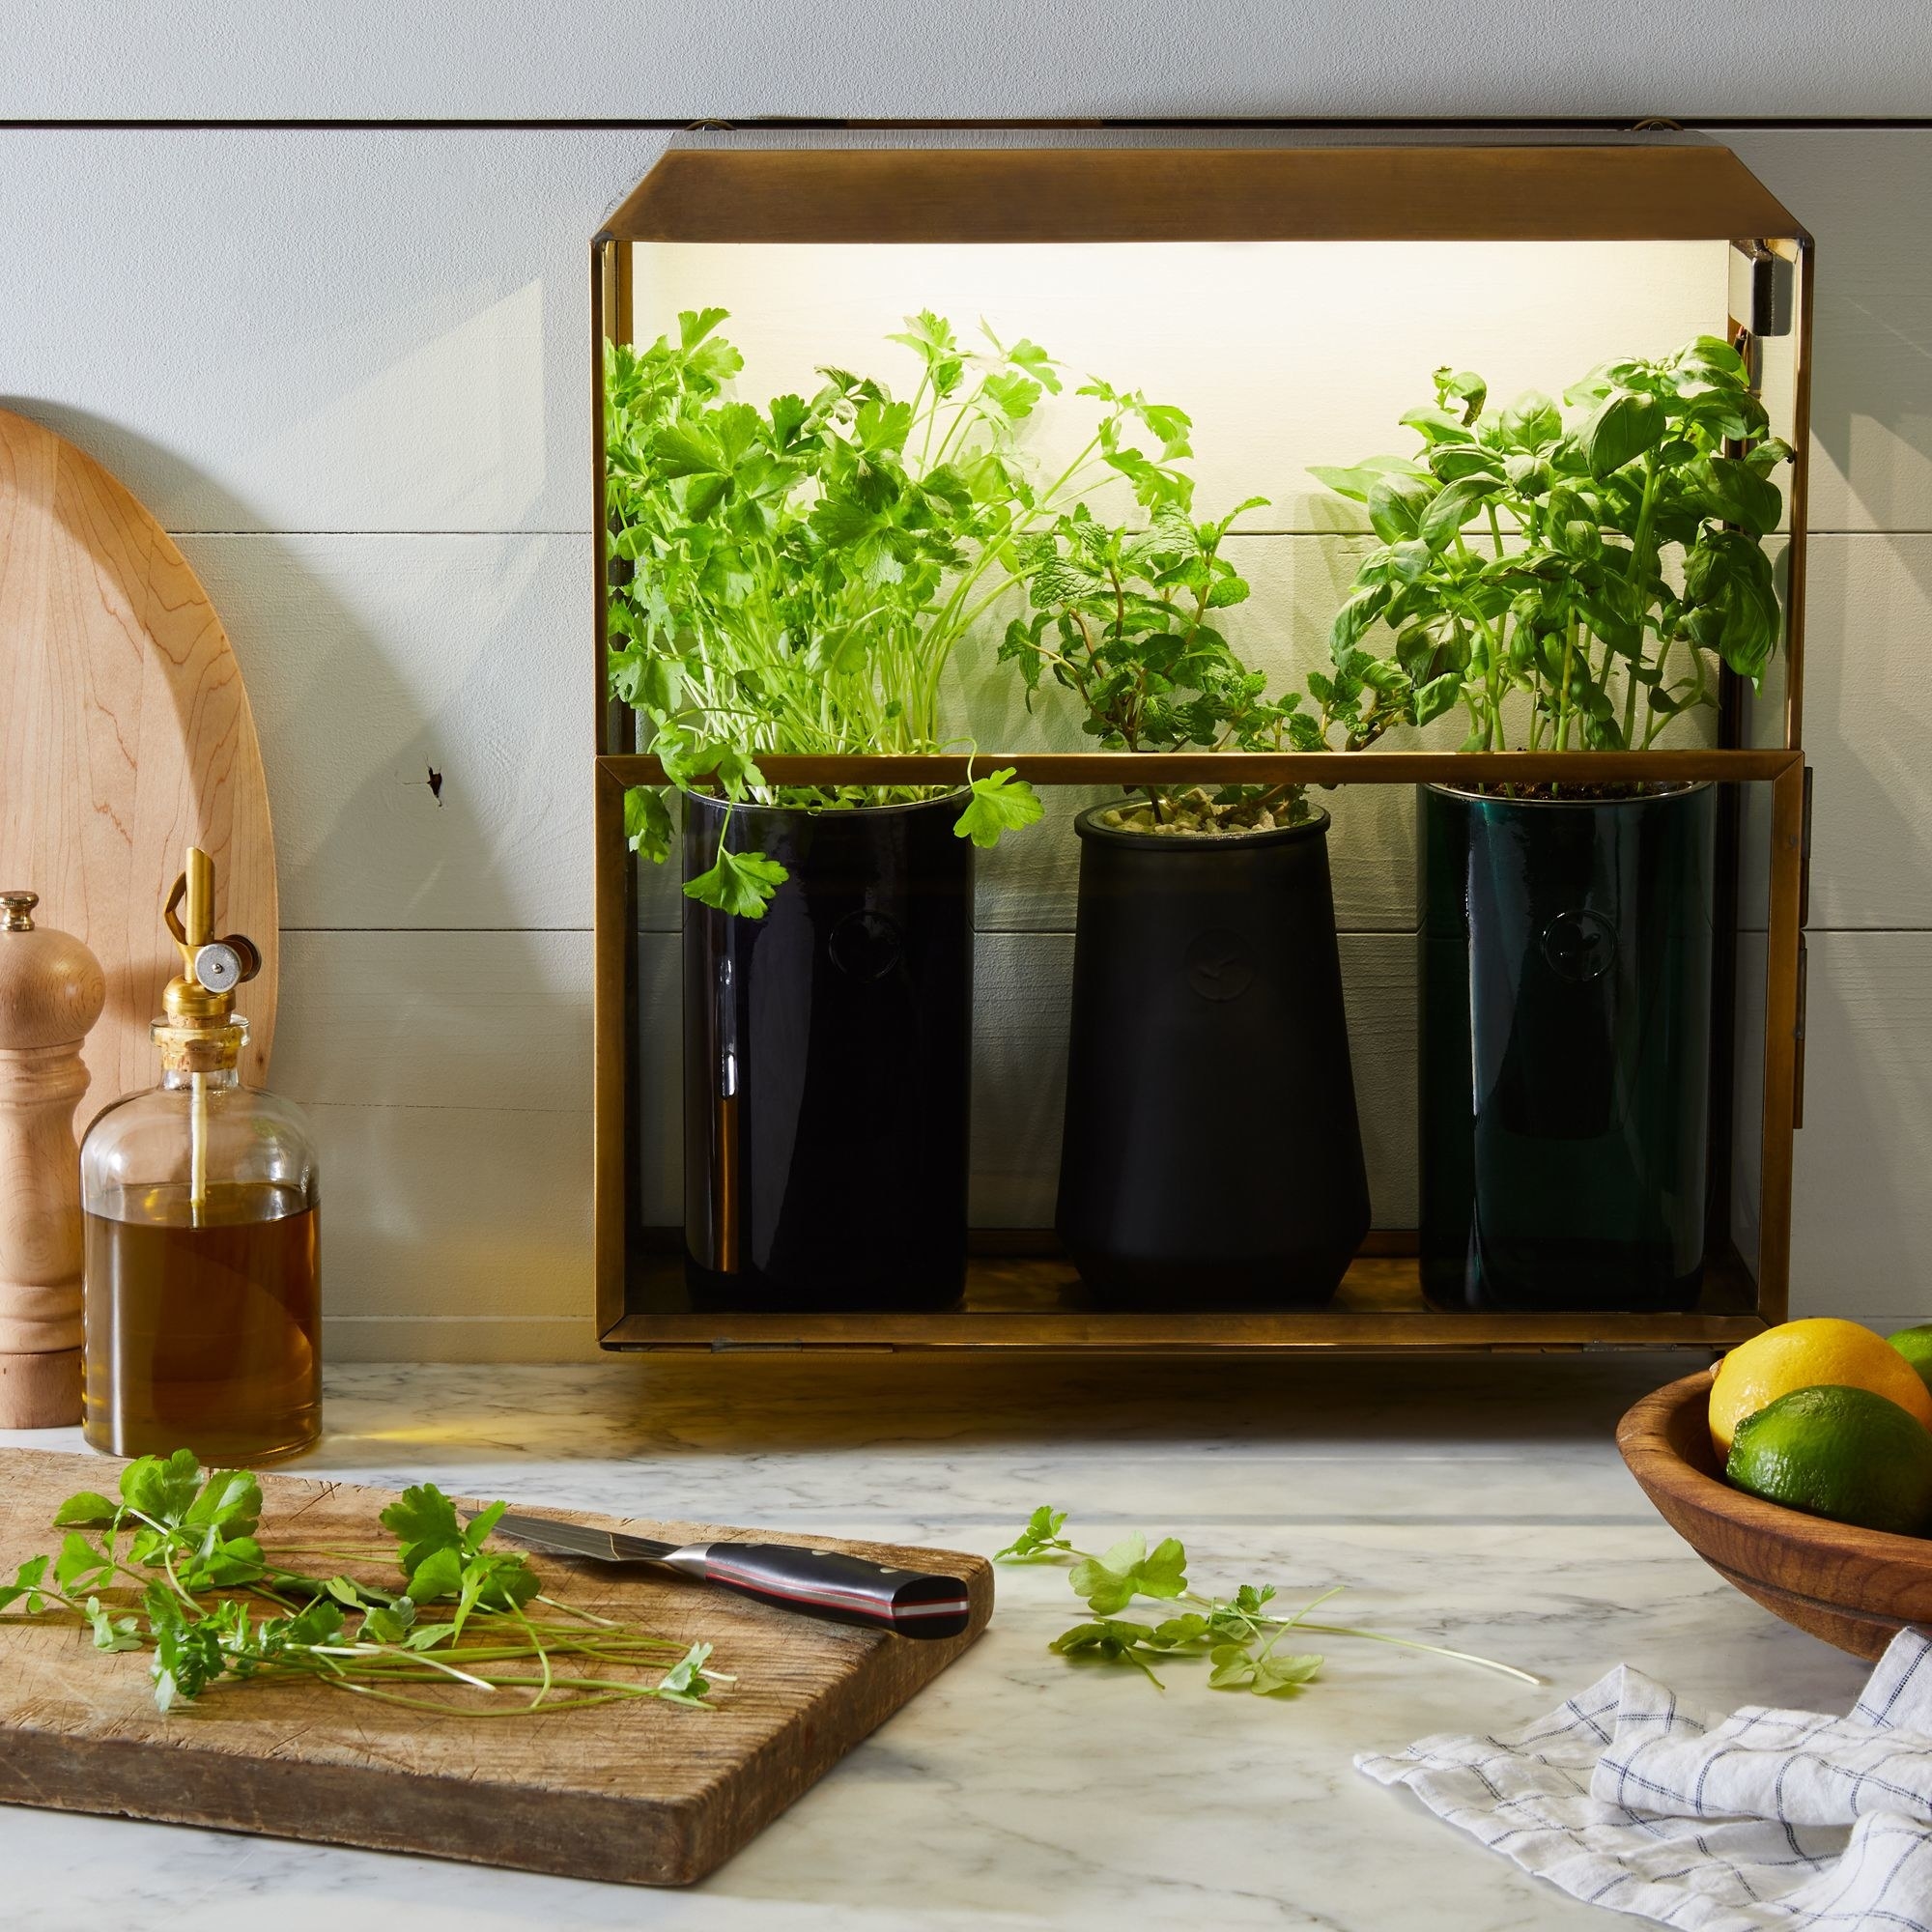 The kit, which comes with opaque glass planters